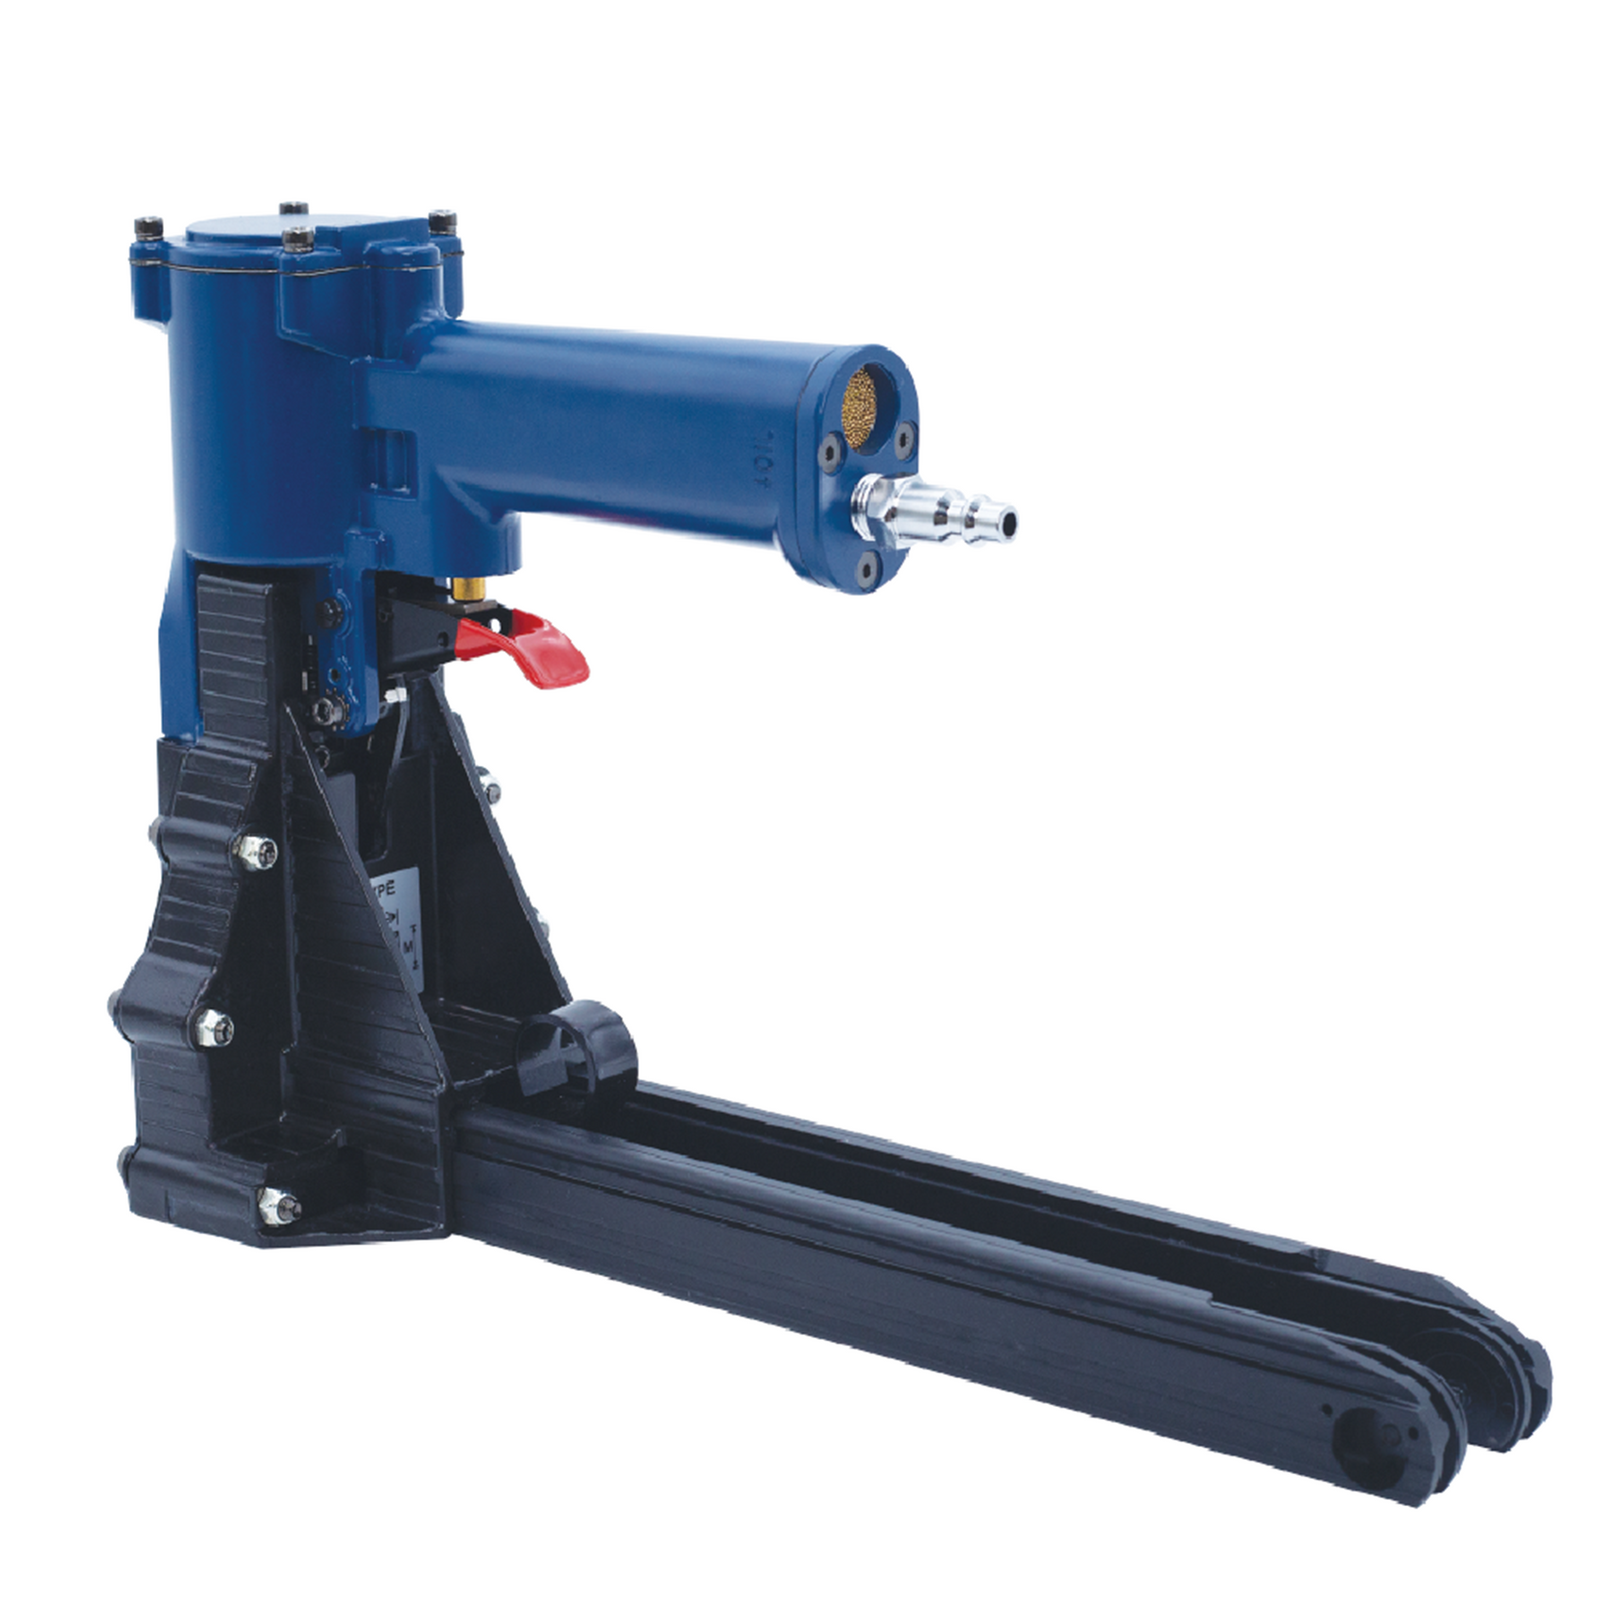 blue and black pneumatic staple gun with red trigger and steel plug